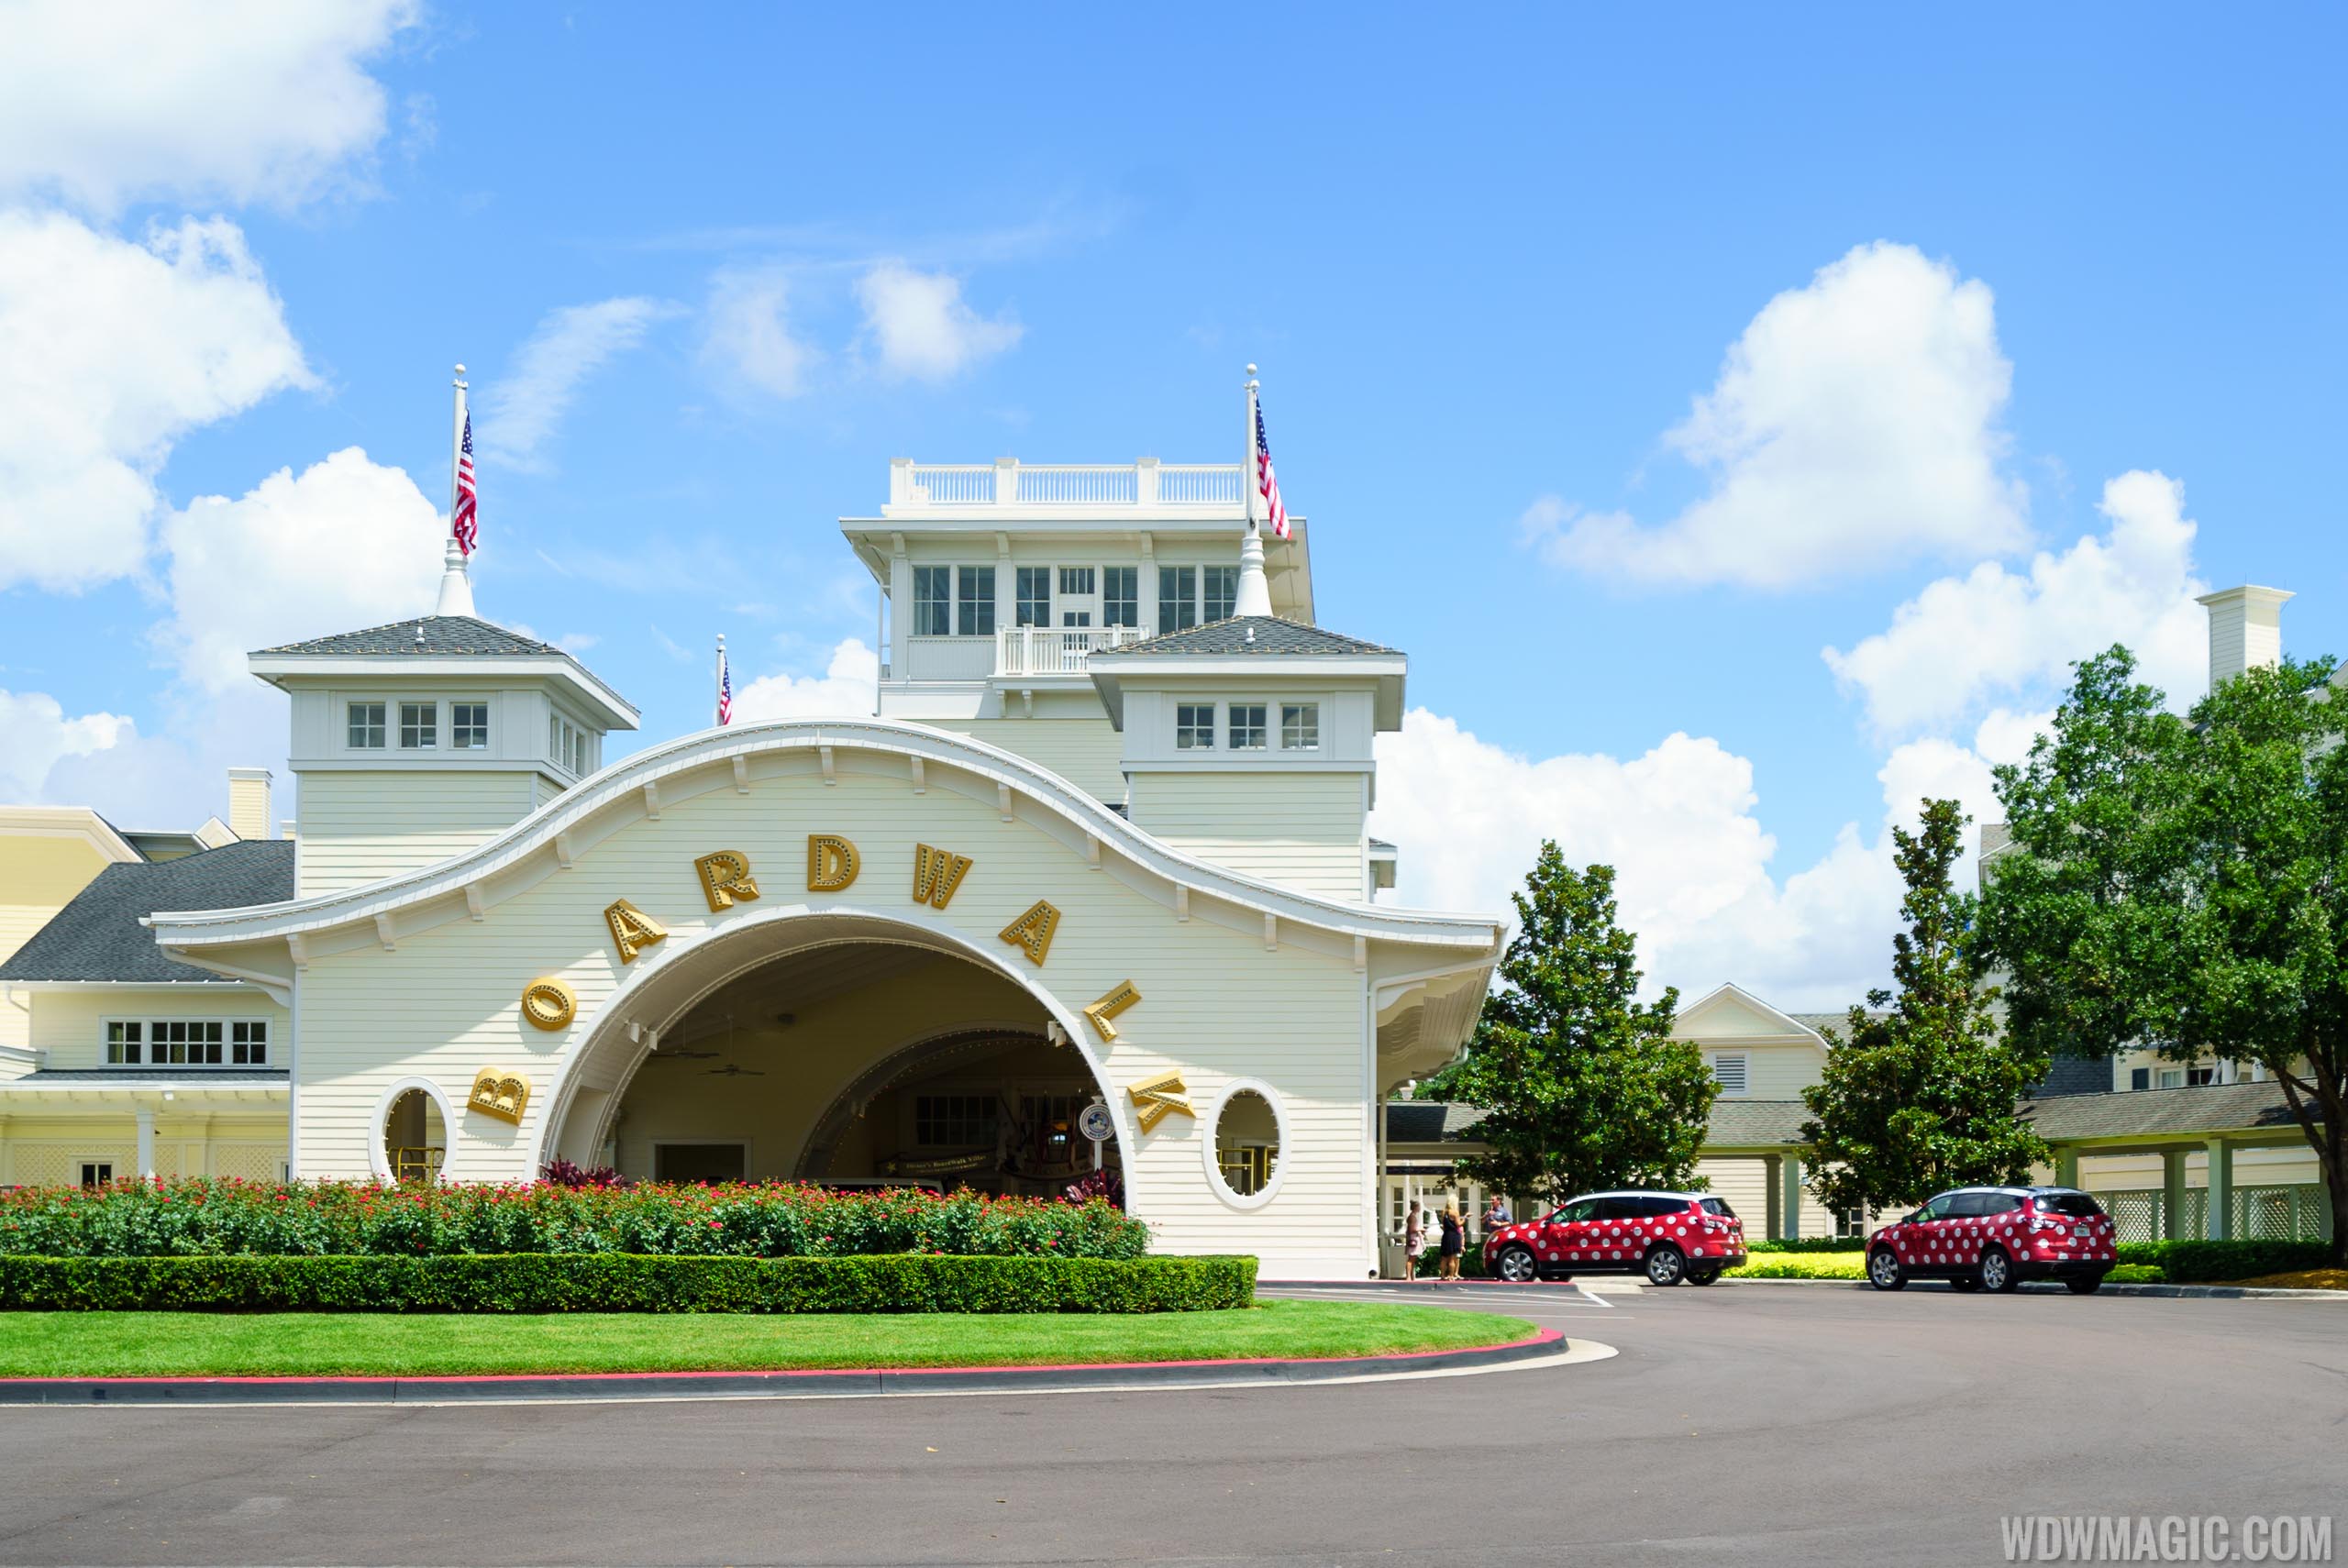 Baggage Airline Guest Services laying off employees at Walt Disney World resort hotels